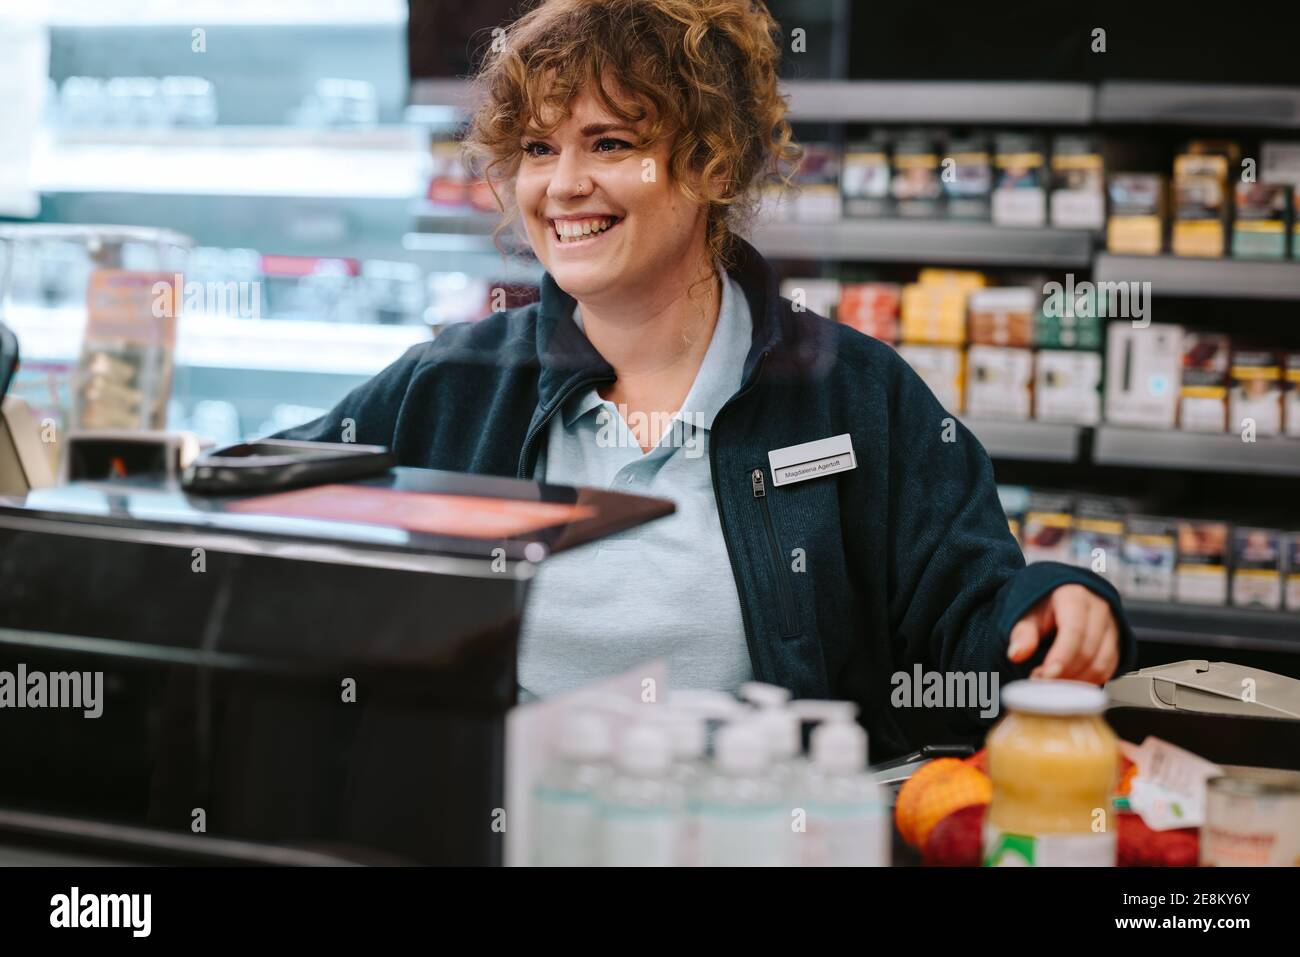 Female grocery store manager working at checkout counter. Woman cashier working at supermarket checkout. Stock Photo